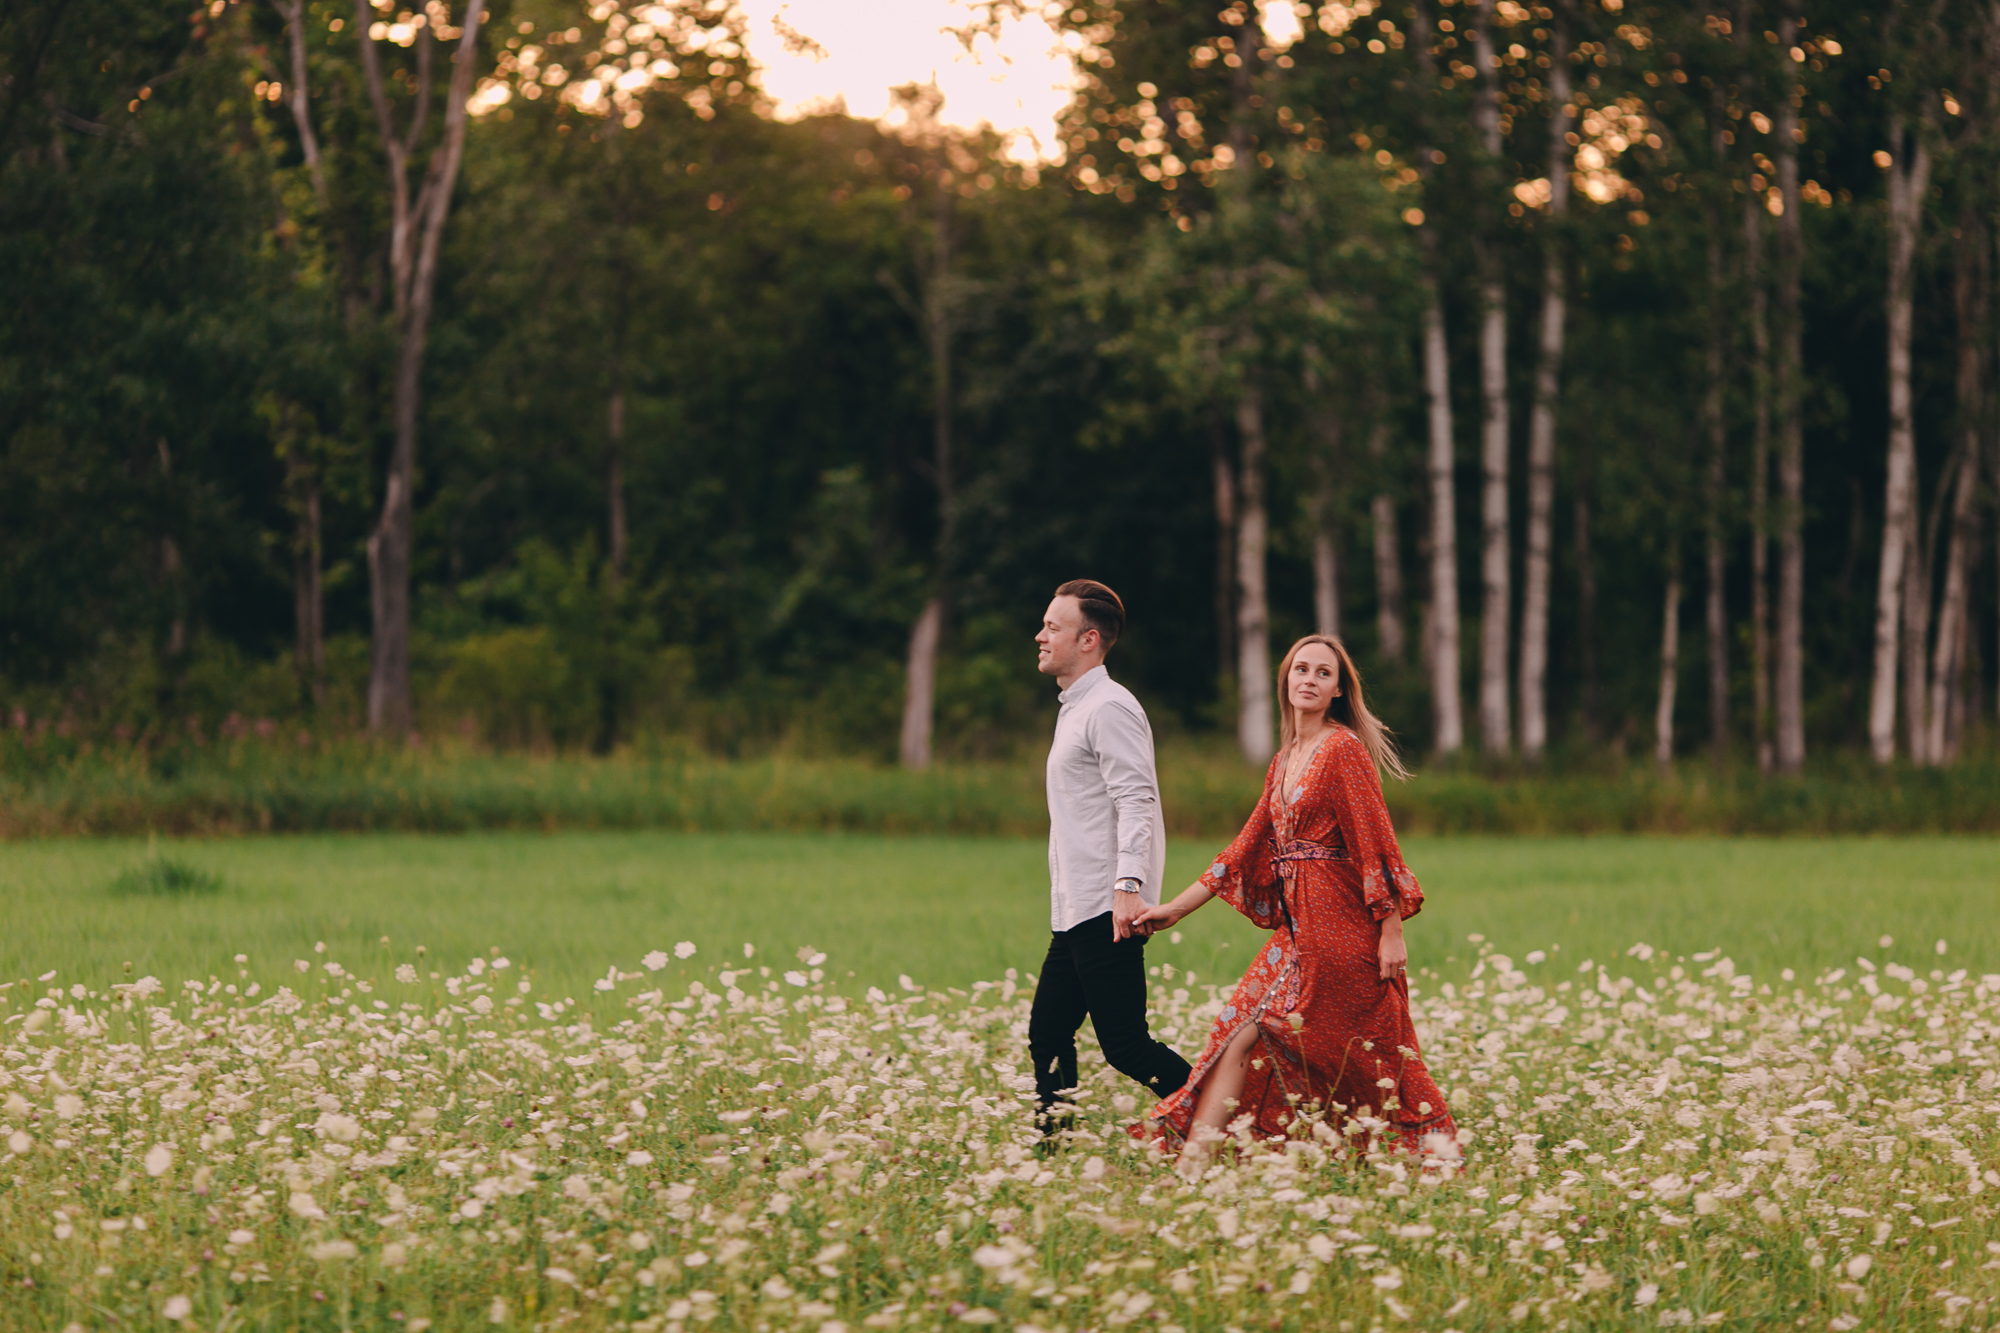 Engagement photos to ease your anxiety